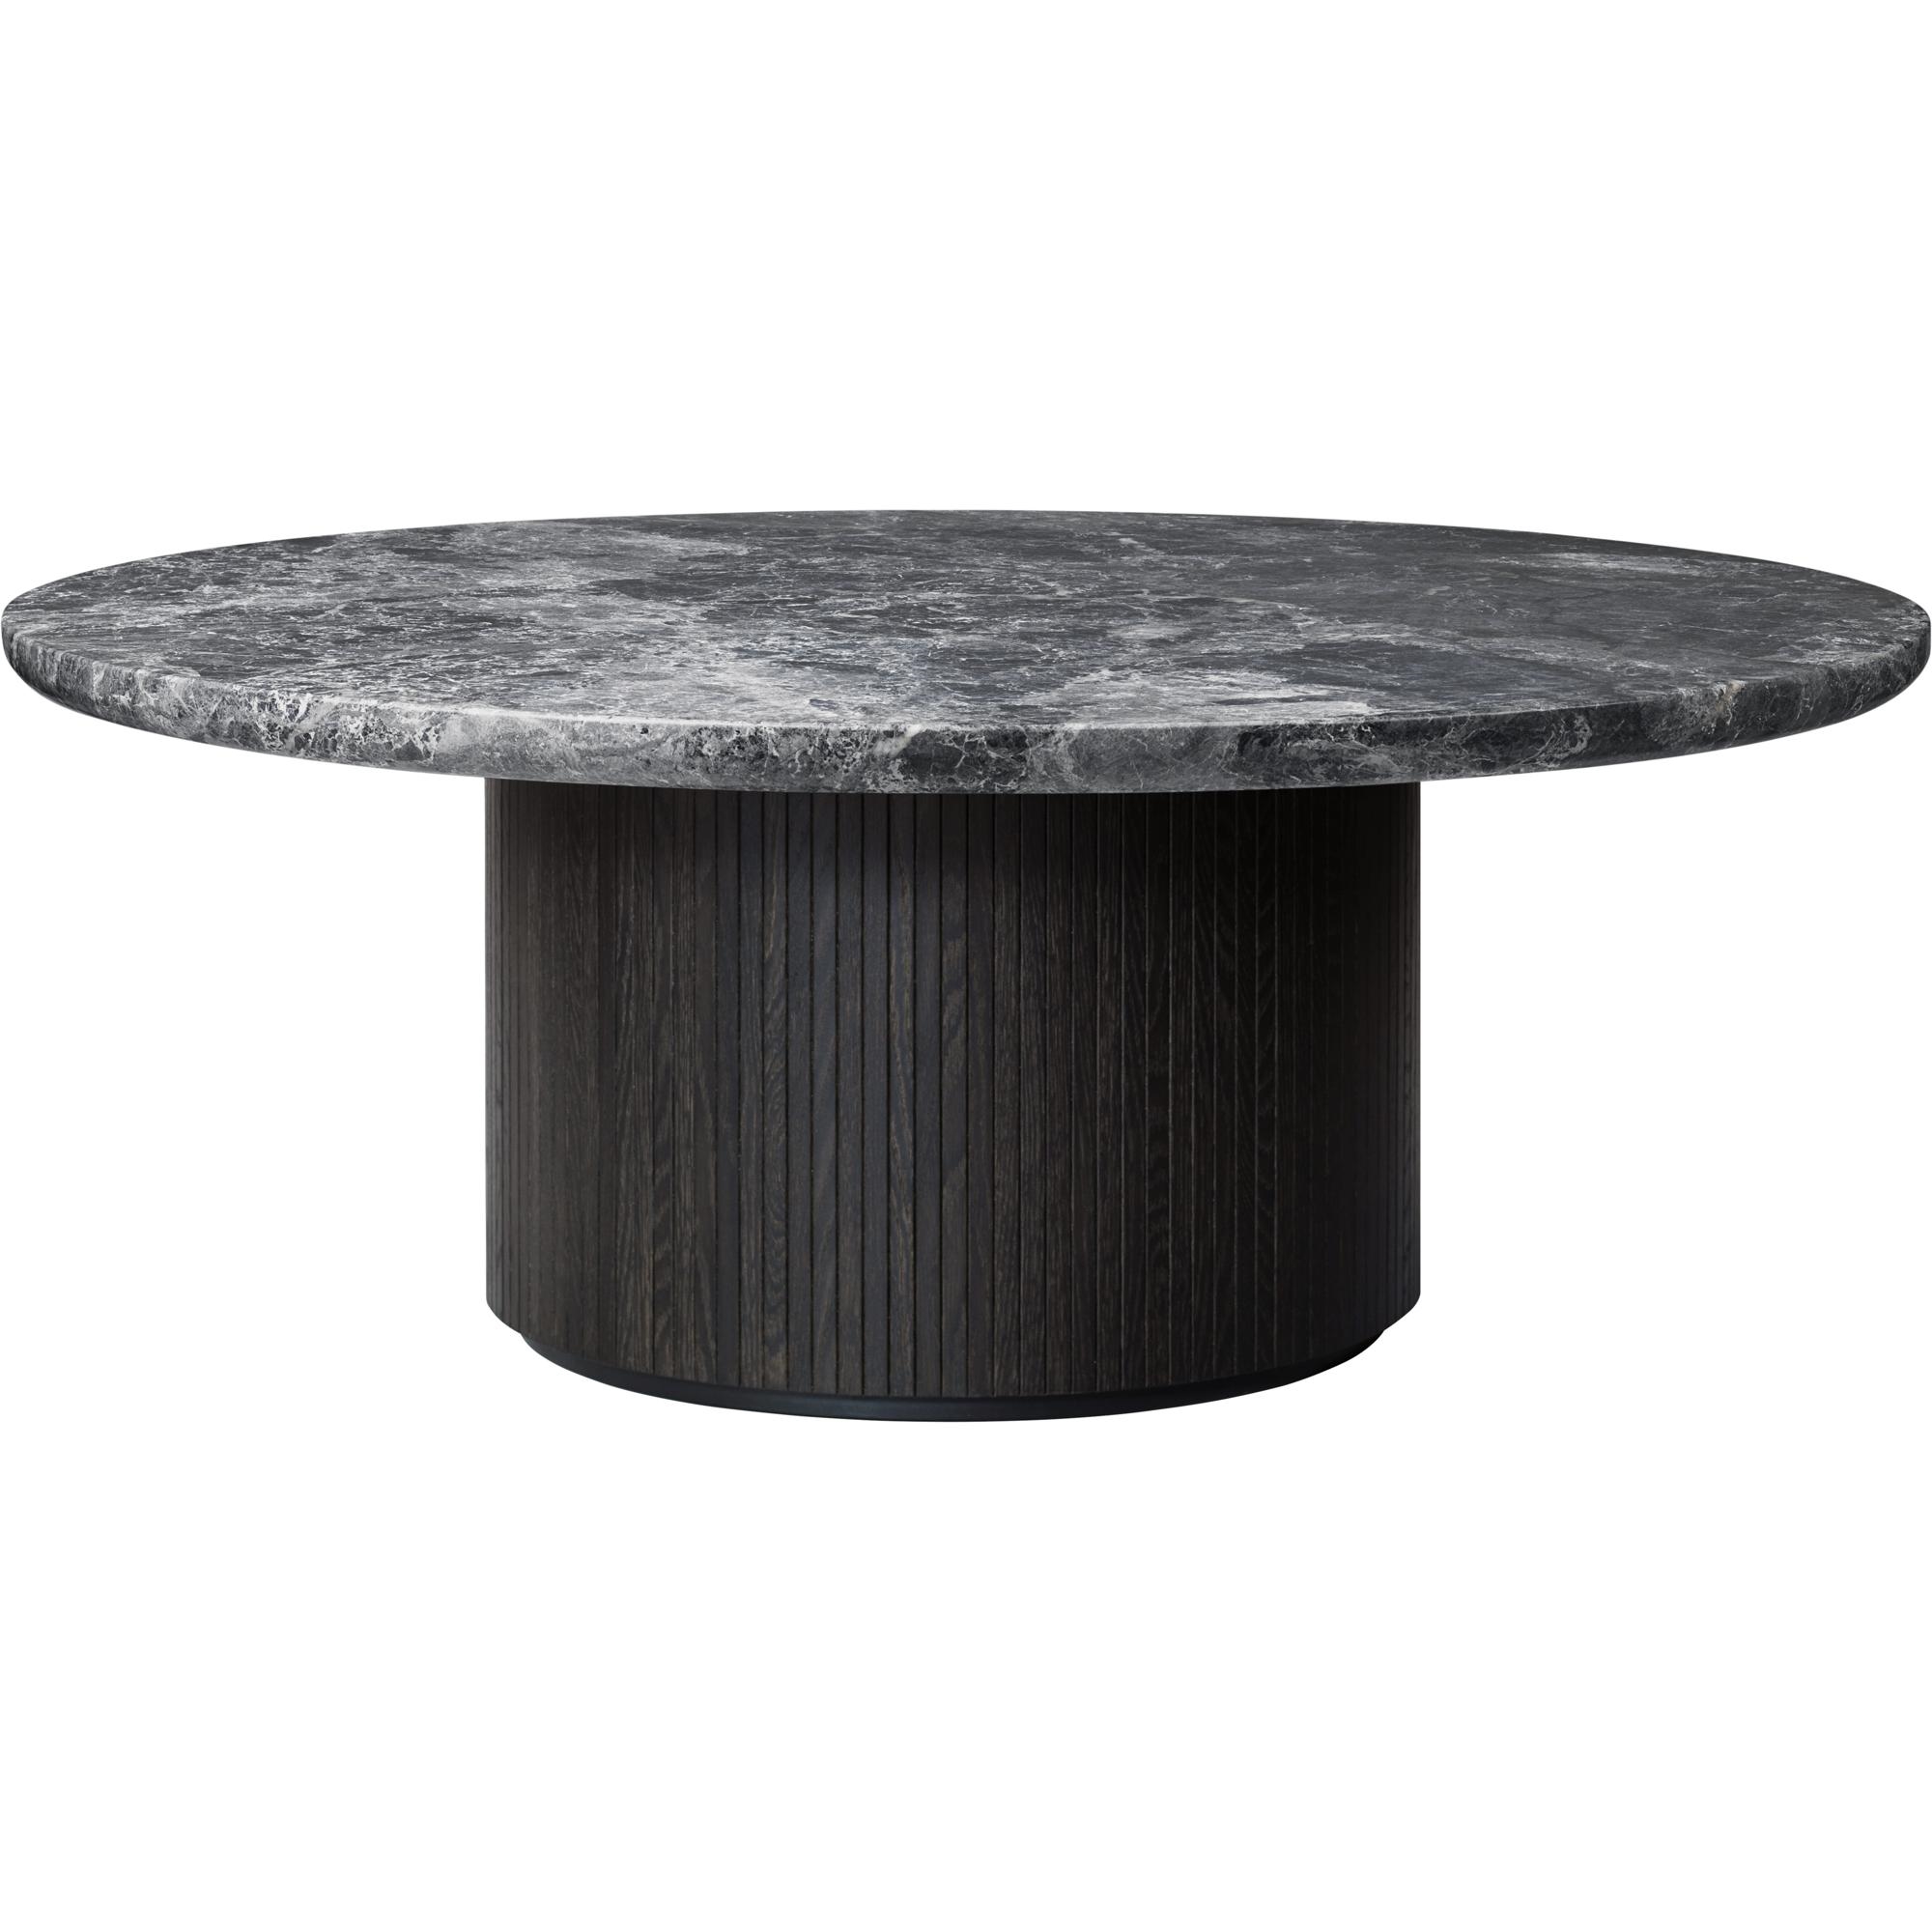 GUBI Moon Coffee Table Round Ø120 cm w. Wood Base and Gray Emperador Marble Top